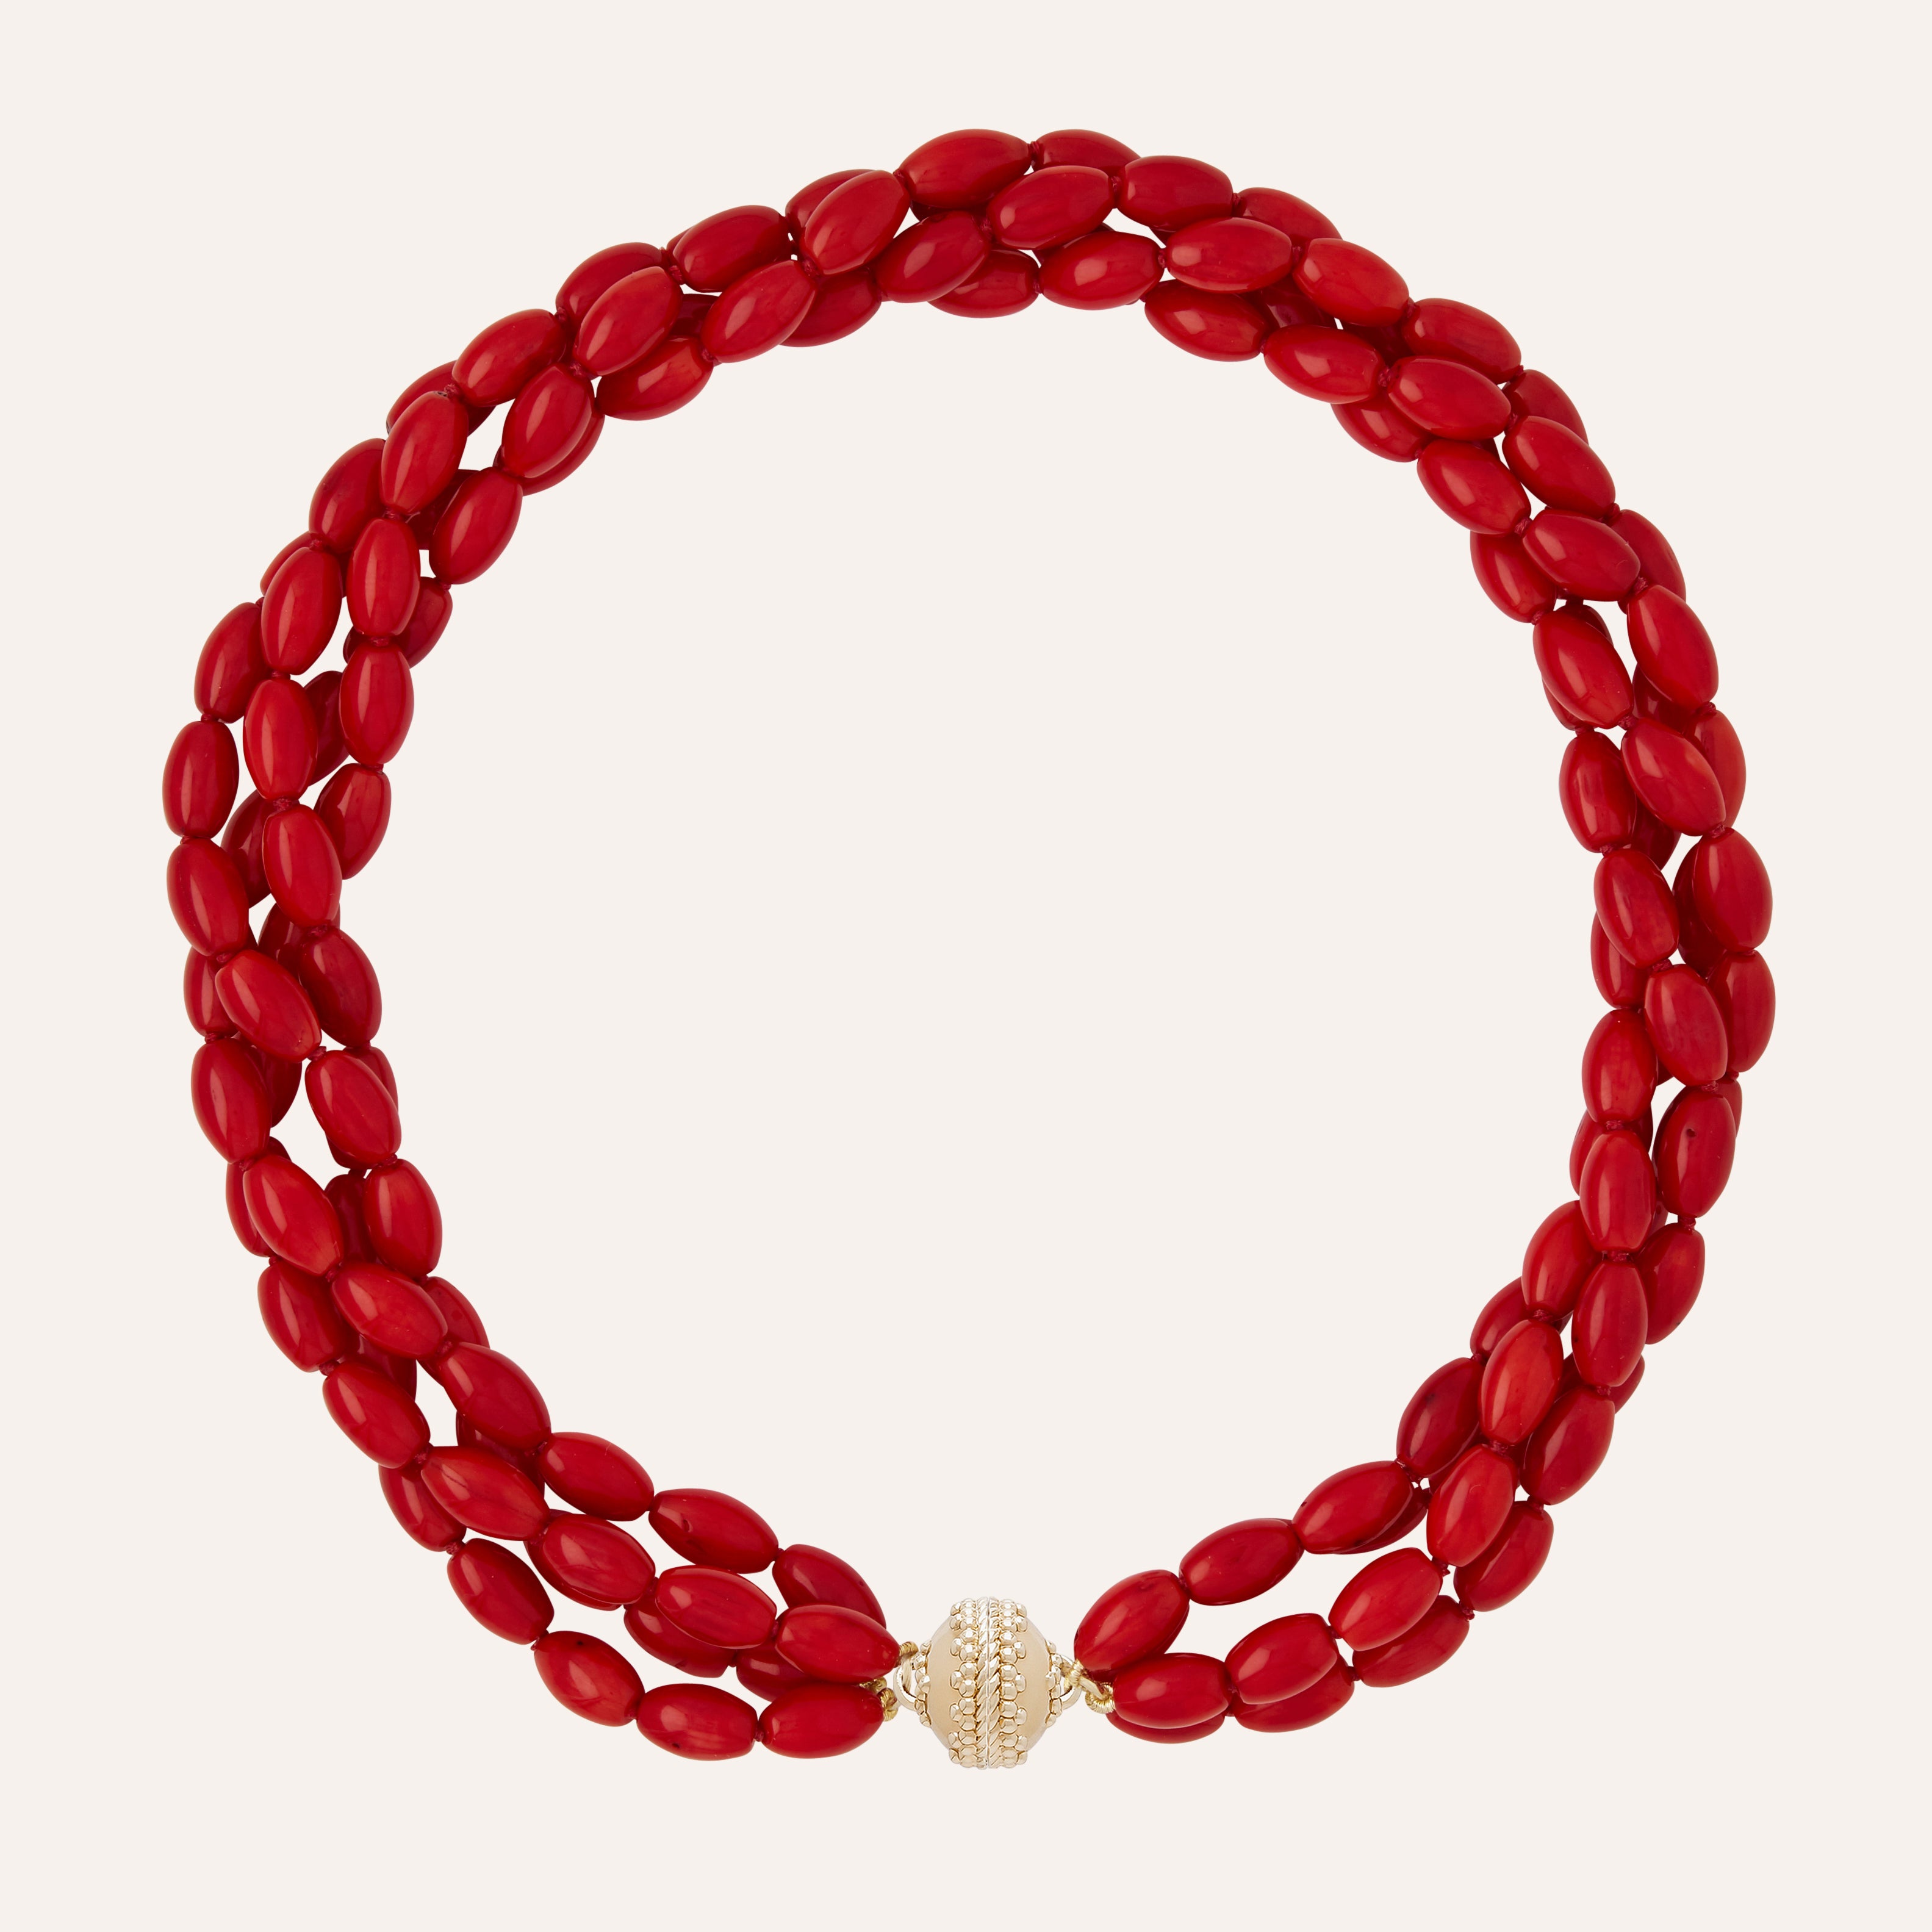 Dyed Red Coral Oval Multi-Strand Necklace